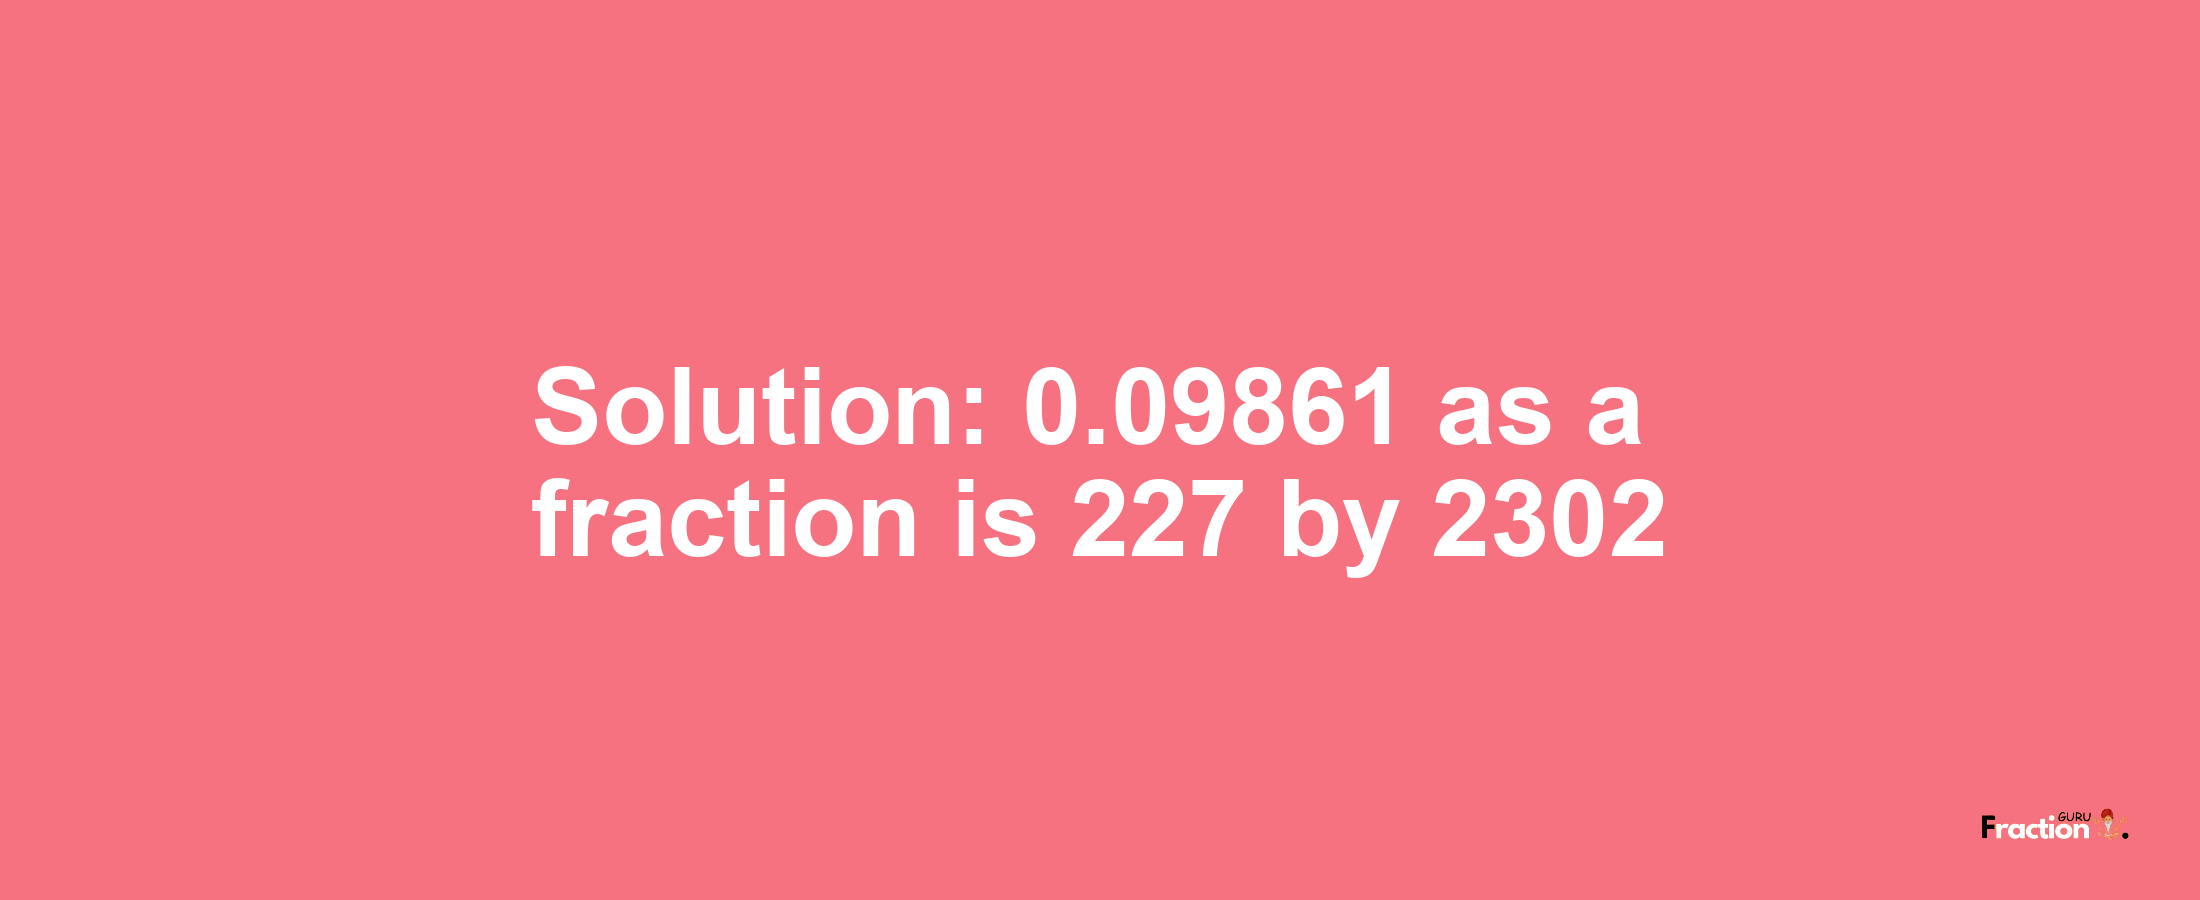 Solution:0.09861 as a fraction is 227/2302